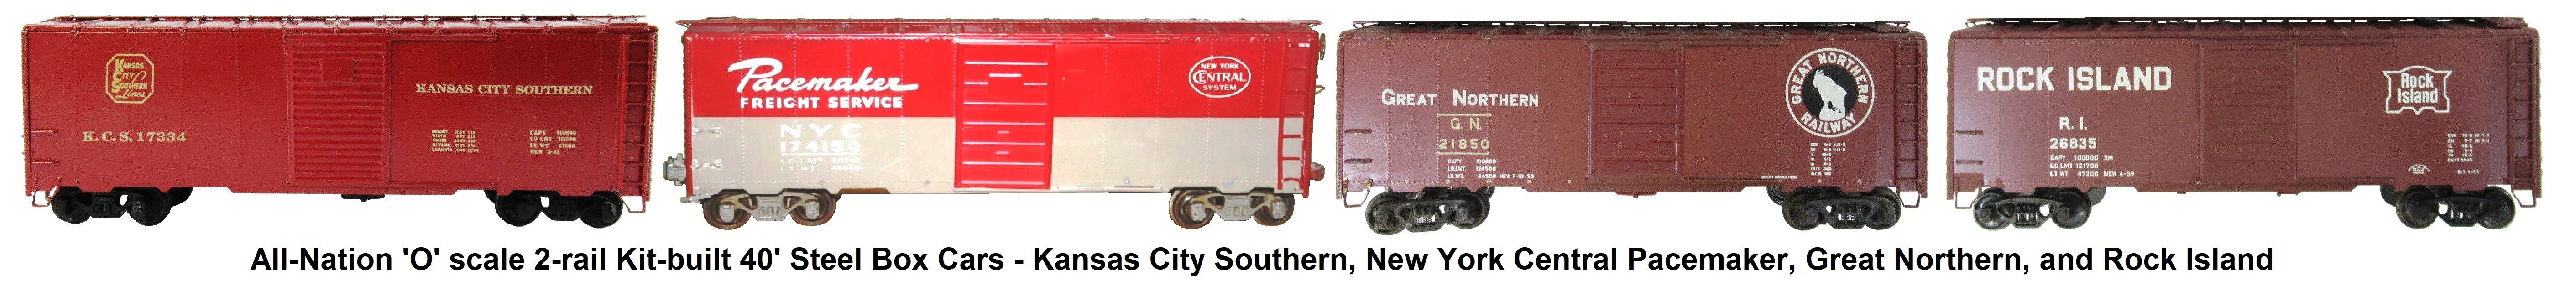 All-Nation 'O' scale 2-rail Kit-built 40' Steel Box Cars - Kansas City Southern, New York Central Pacemaker, Great Northern, and Rock Island